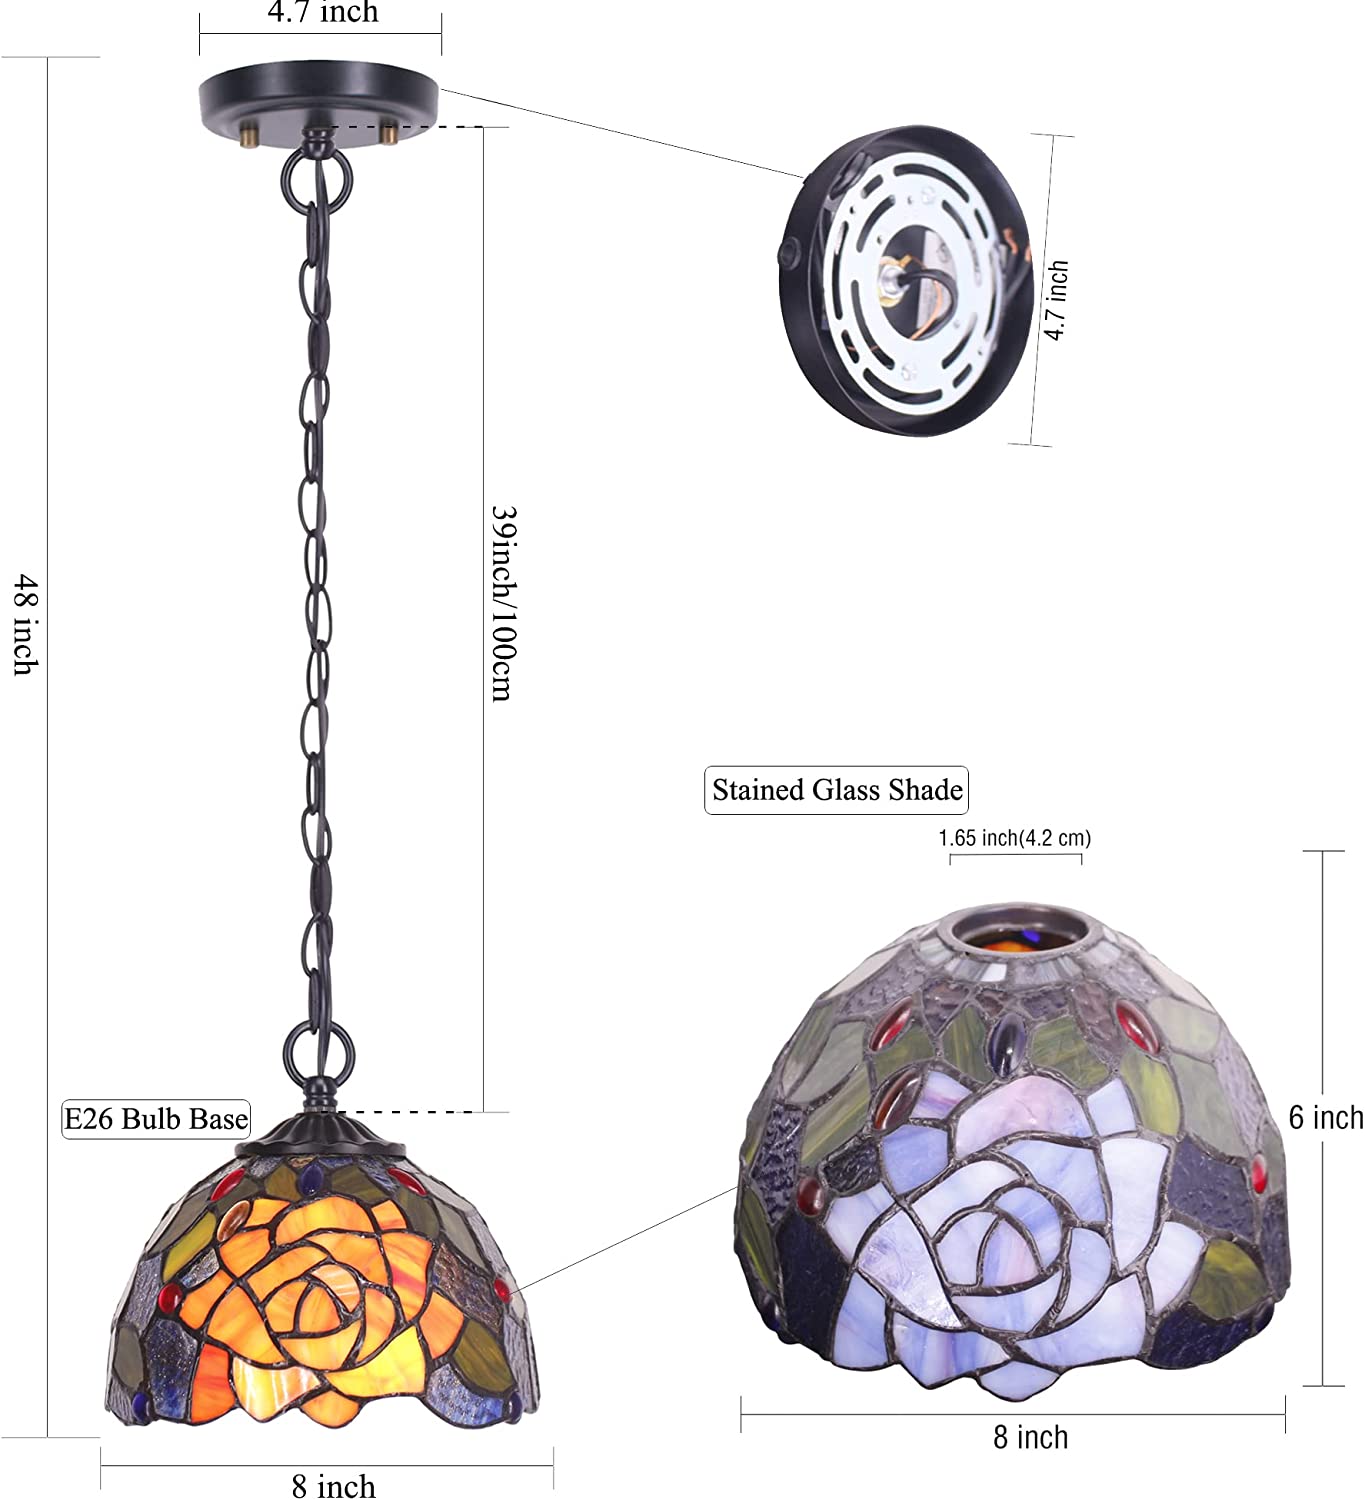 Werfactory® Tiffany Pendant Light Stained Glass Rose Style Hanging Lamp Fixture